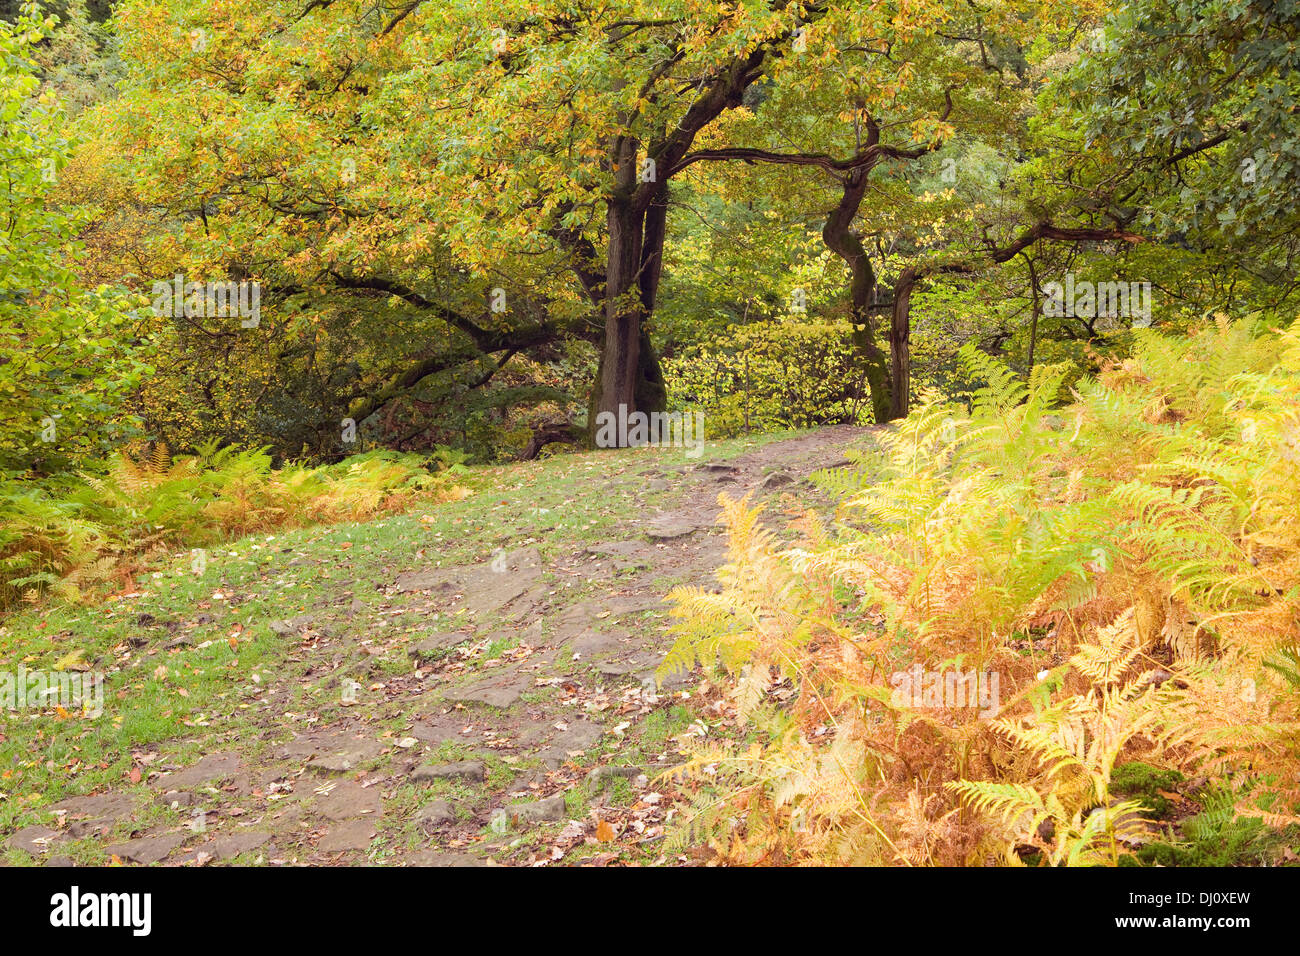 Haugh Wood, Wharfedale, Yorkshire Dales National Park, England, UK. October 2013. Stock Photo